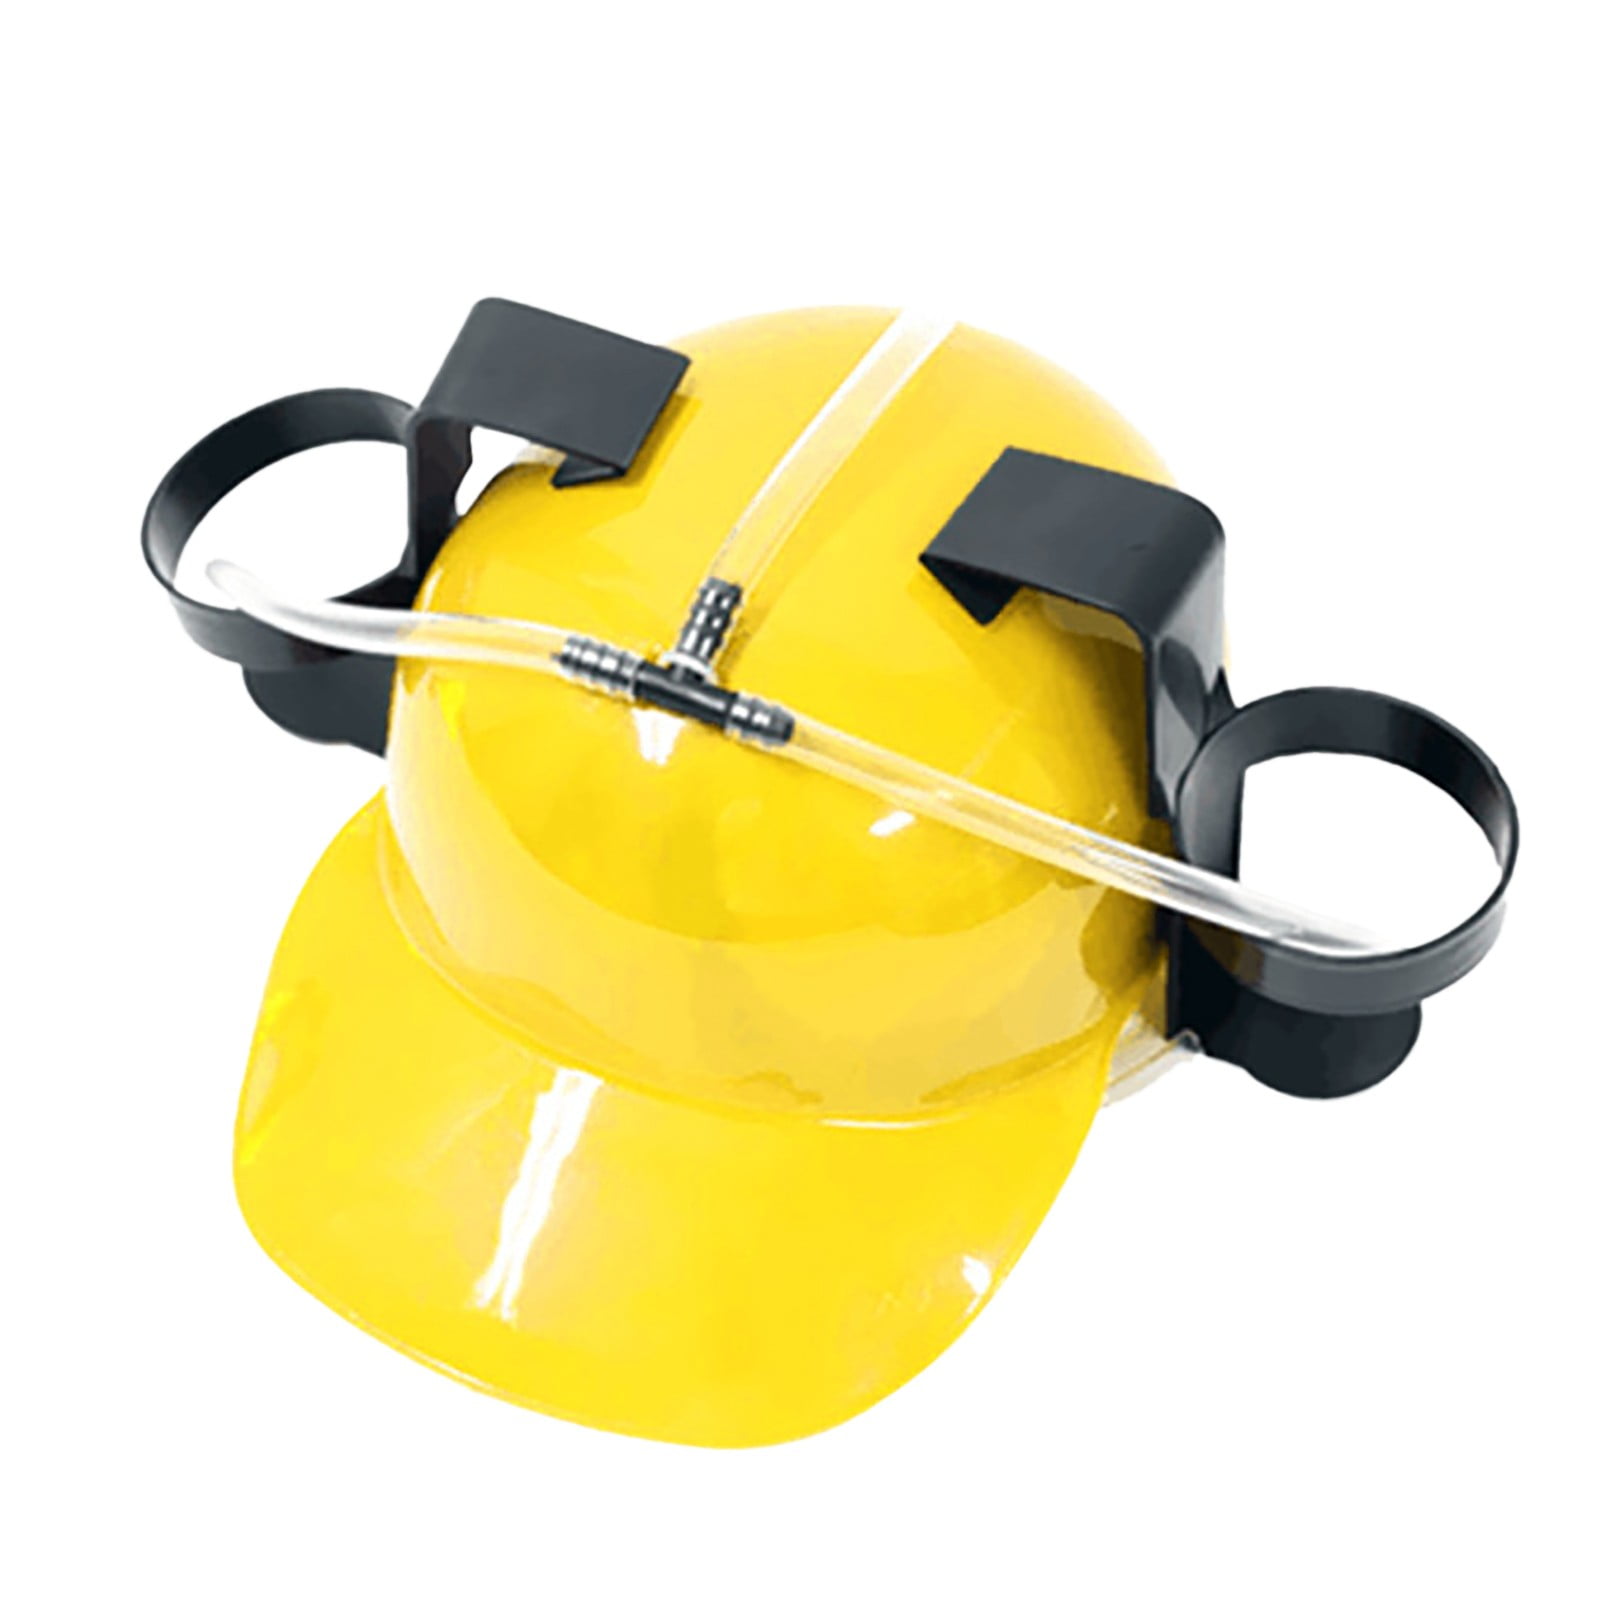 Drinking Hat Drinking Beverage Hard Hat Helmet Beer Soda Can Holder Cap with Straw Lazy for Holiday Birthday Festive Party Yellow 